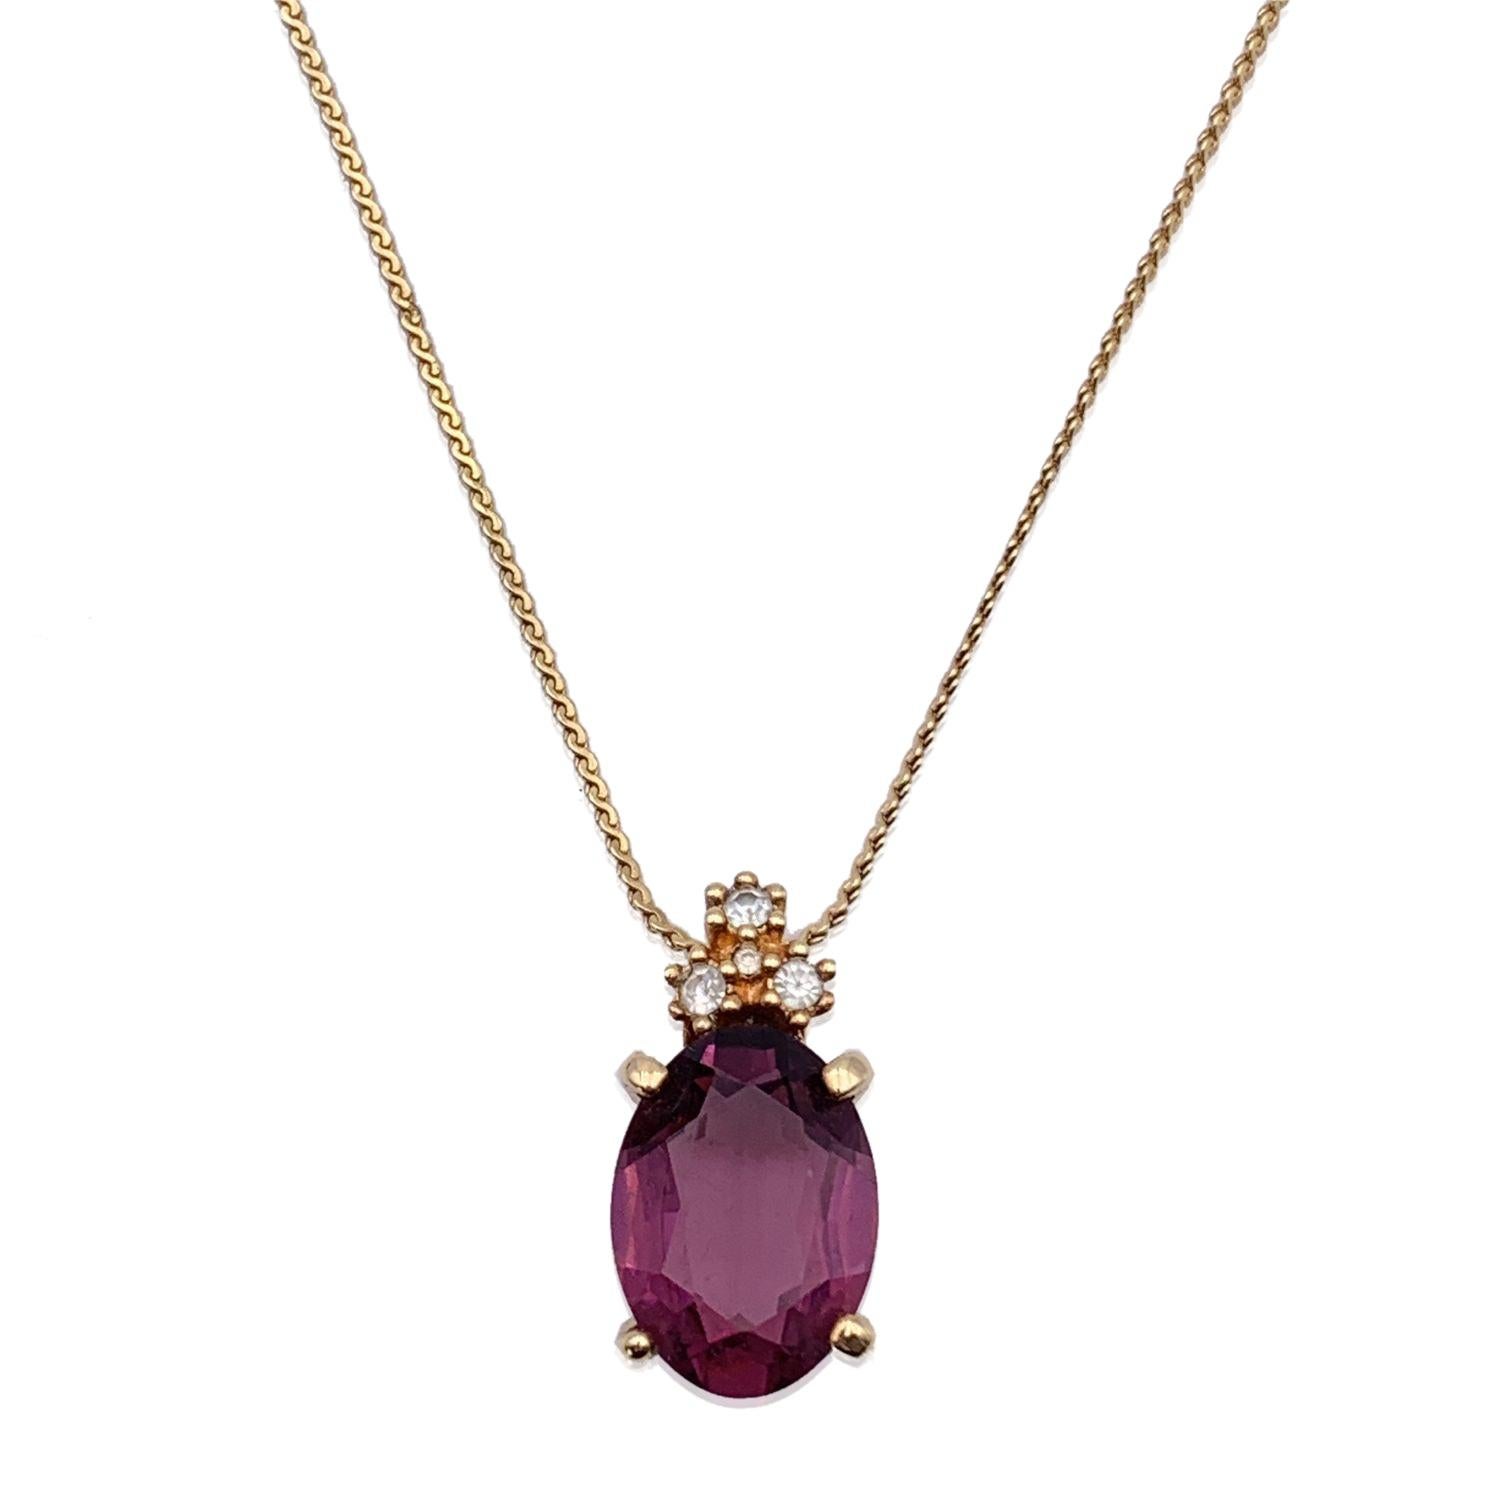 Christian Dior Vintage Gold Oval Purple Crystal Pendant Necklace In Excellent Condition For Sale In Rome, Rome